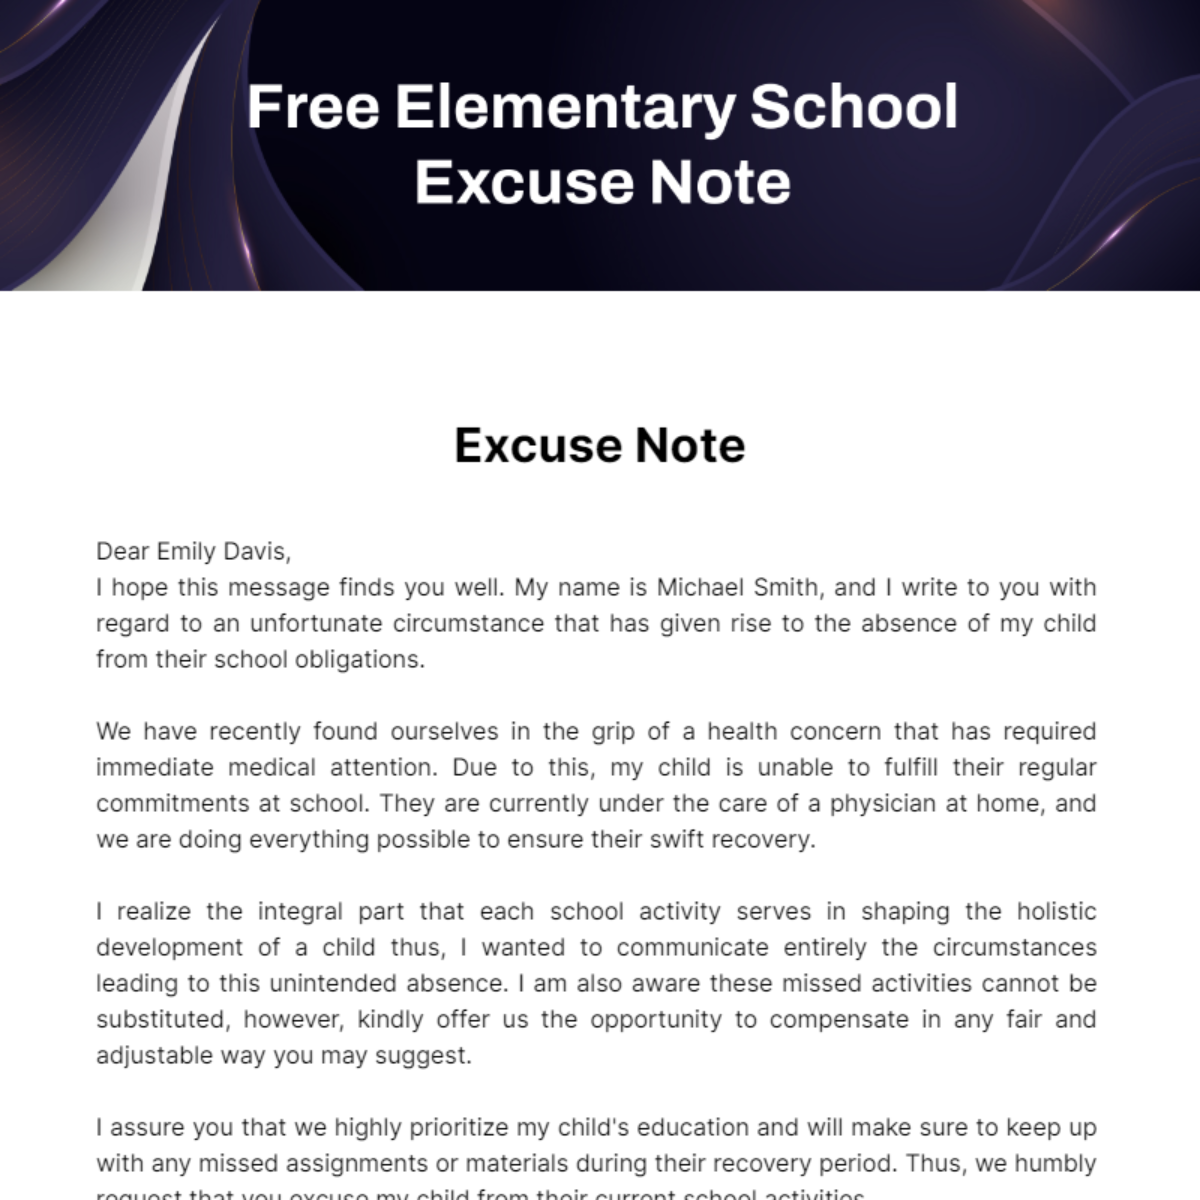 Free Elementary School Excuse Note Template